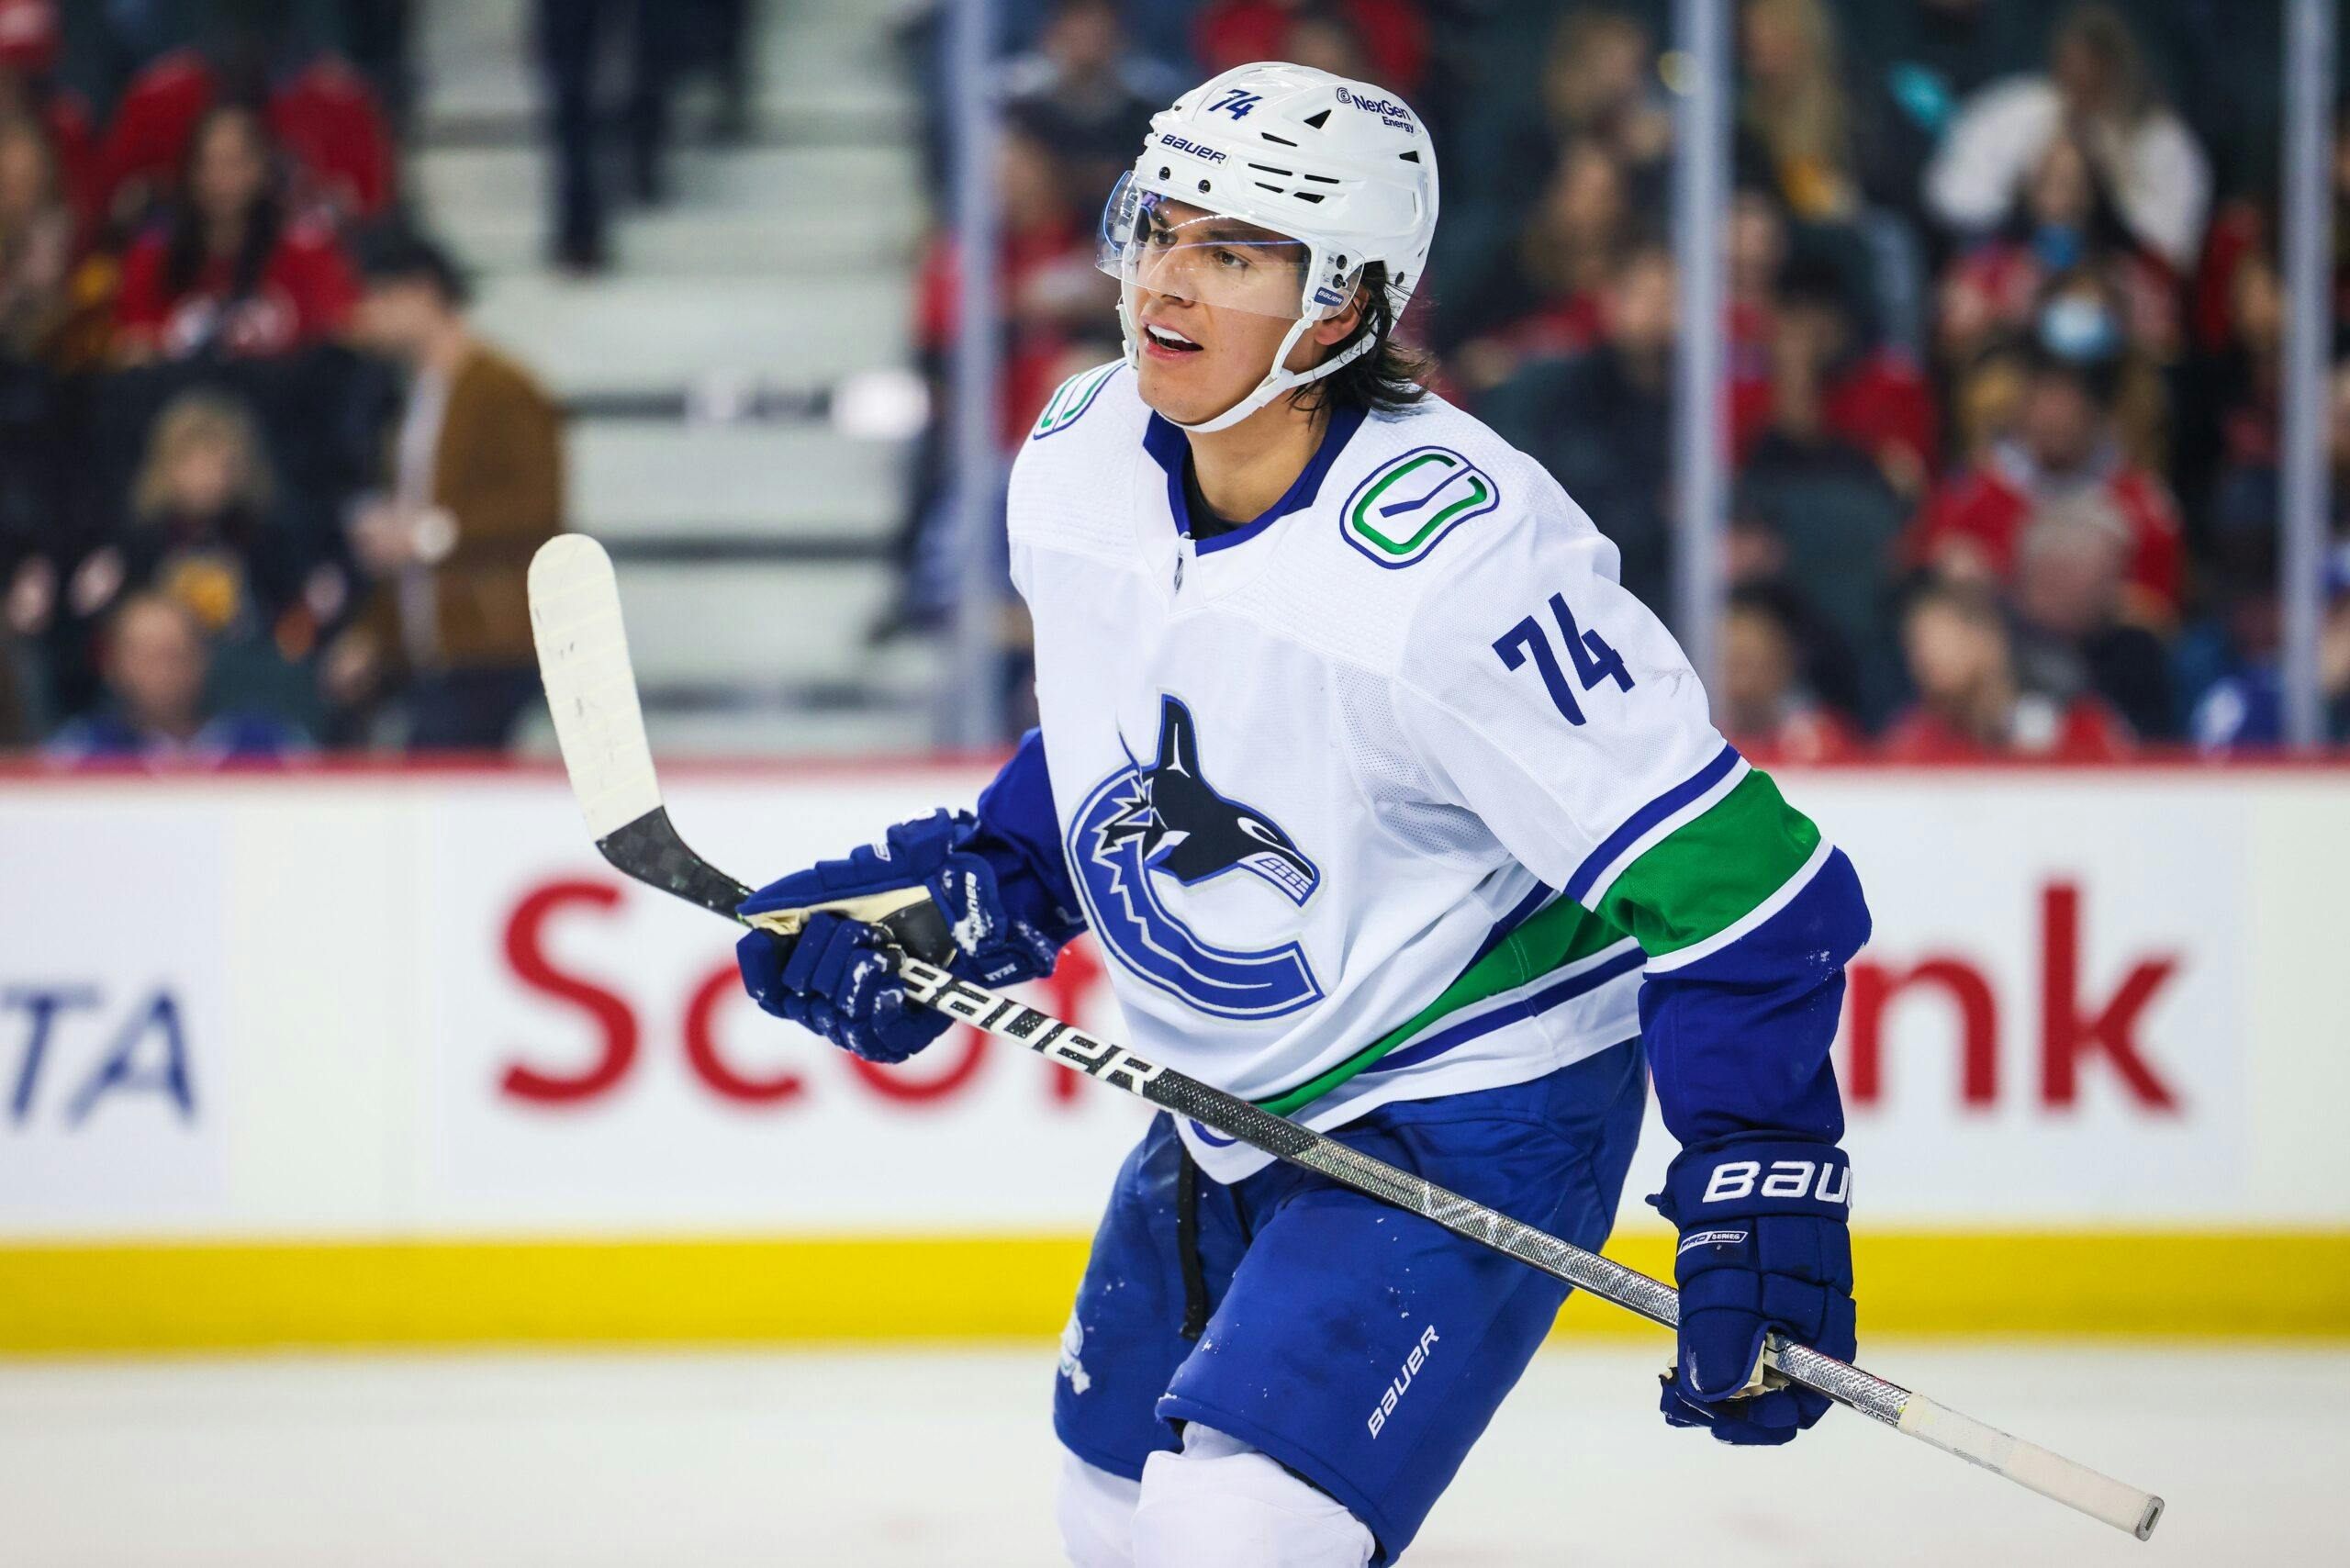 10 memorable former Canucks players and where they are now